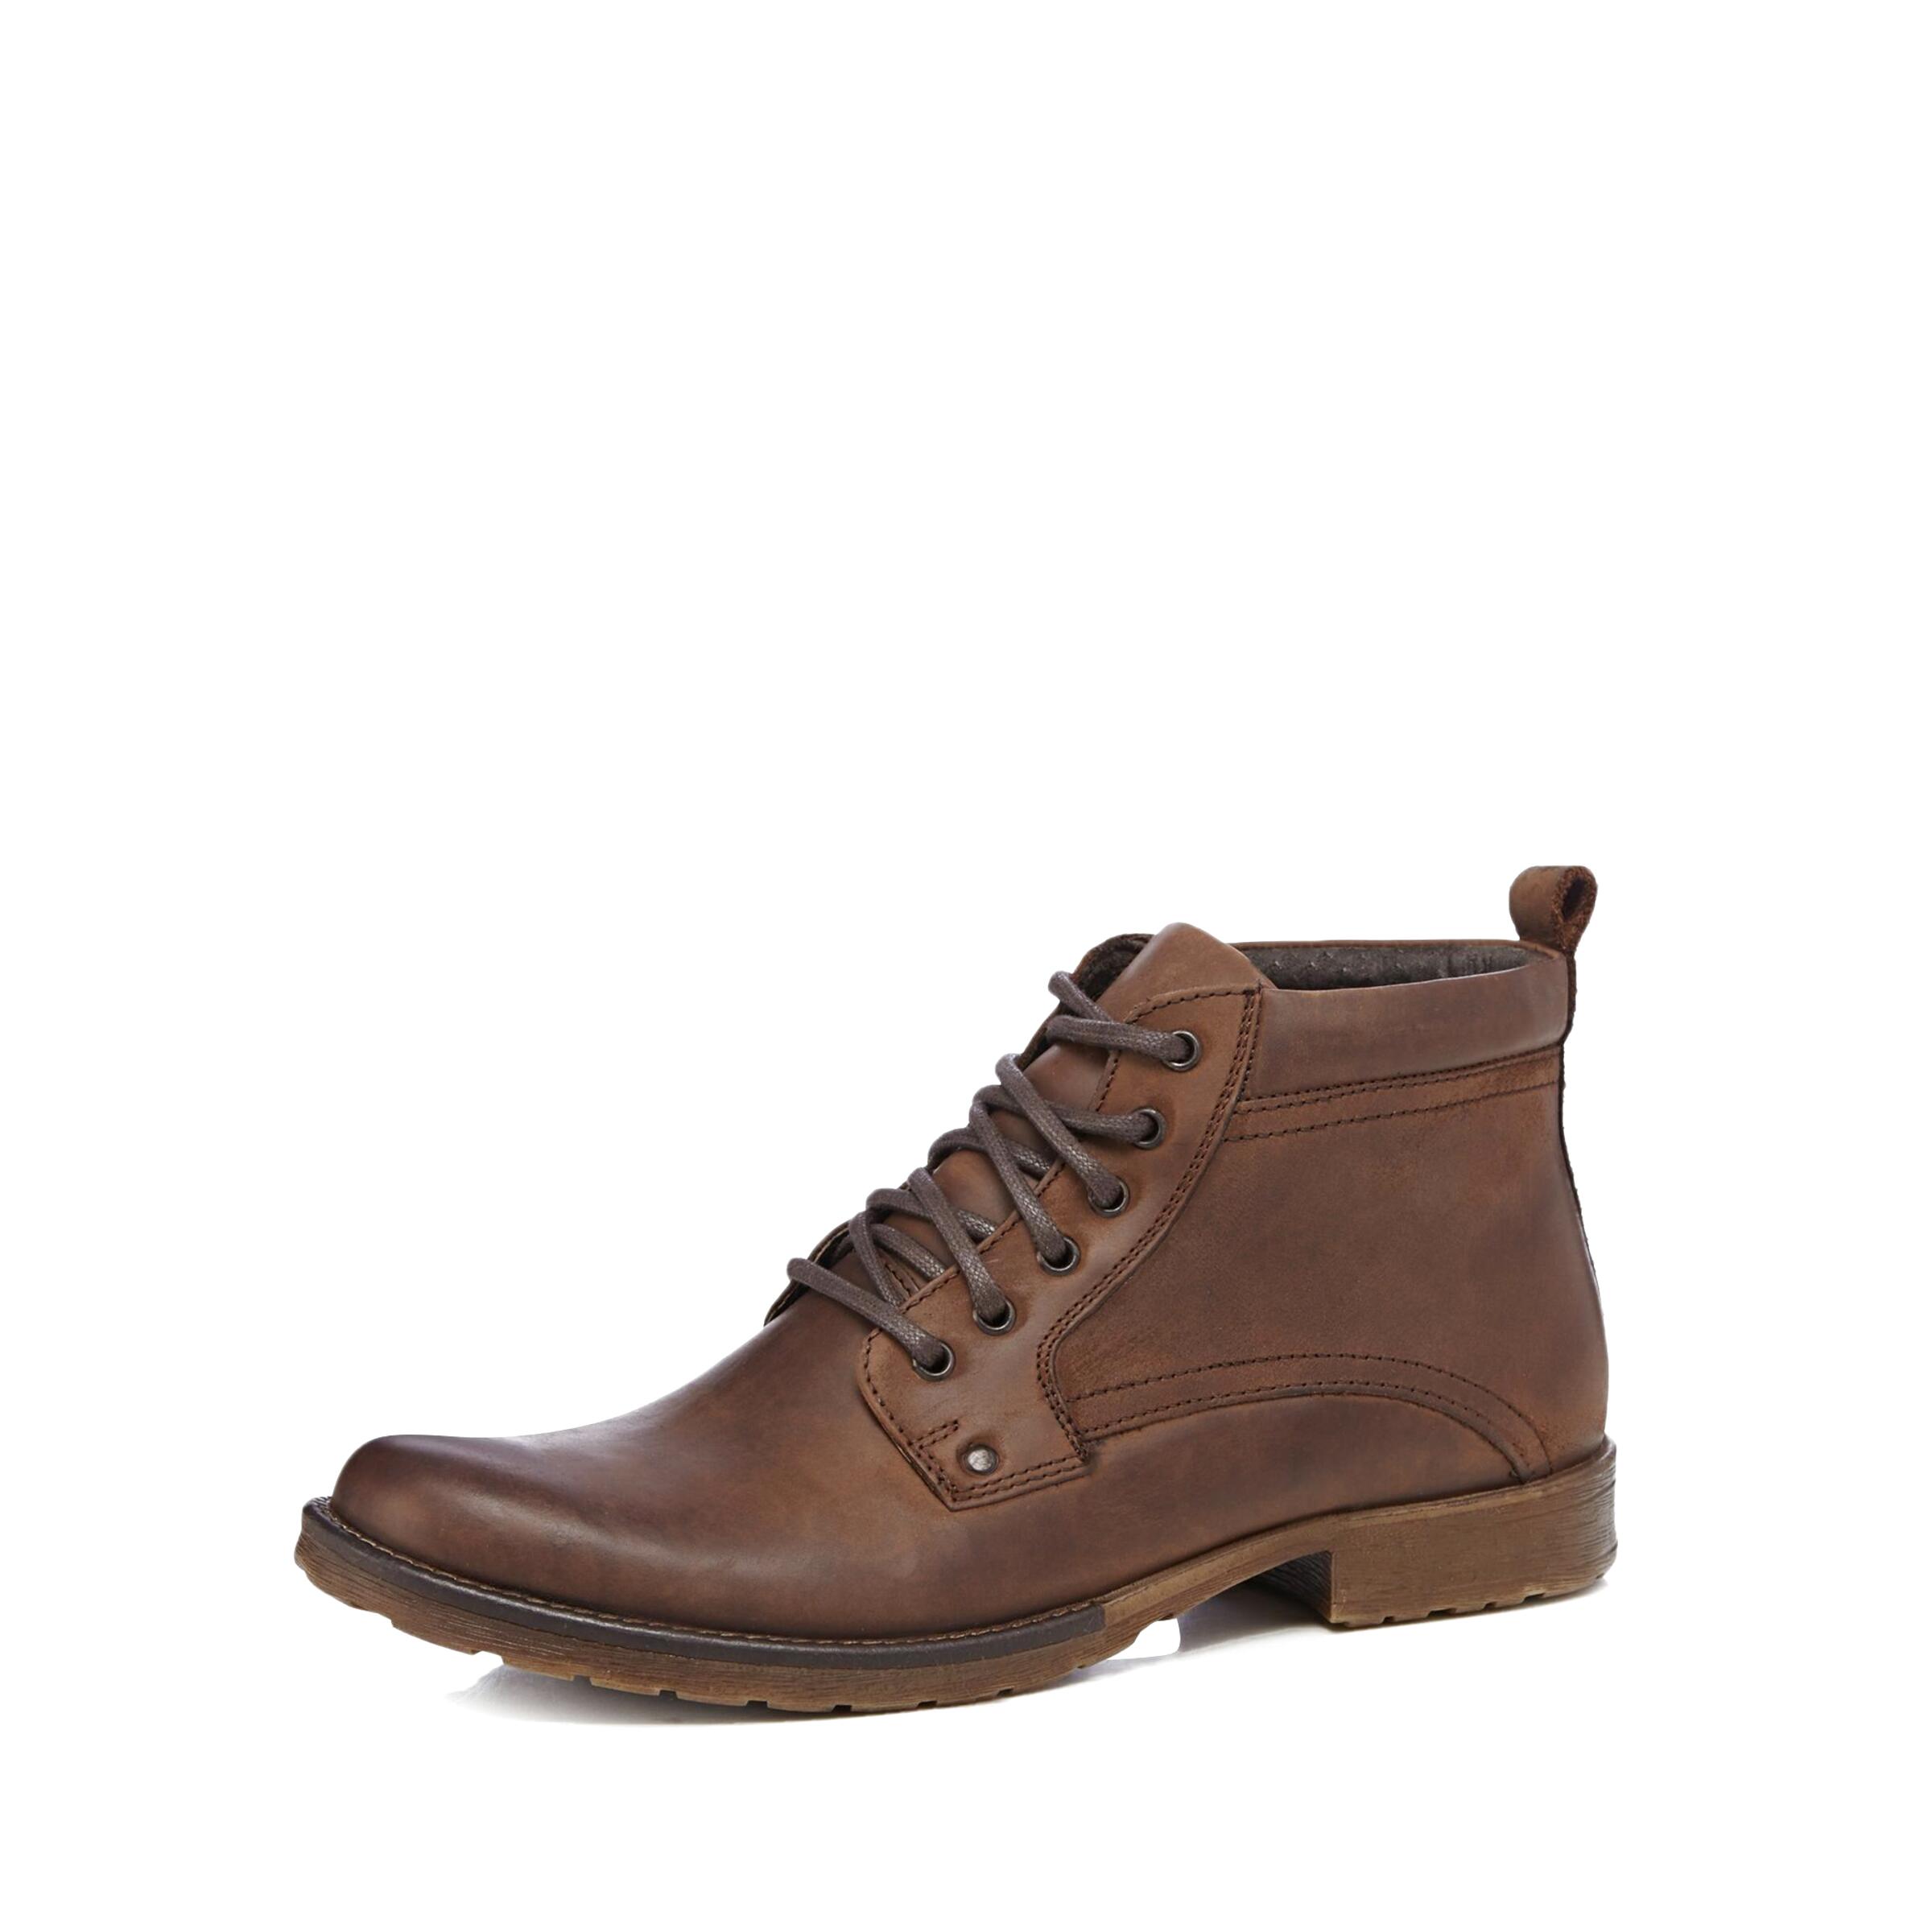 Mantaray Men S Boots for sale in UK | 20 used Mantaray Men S Boots